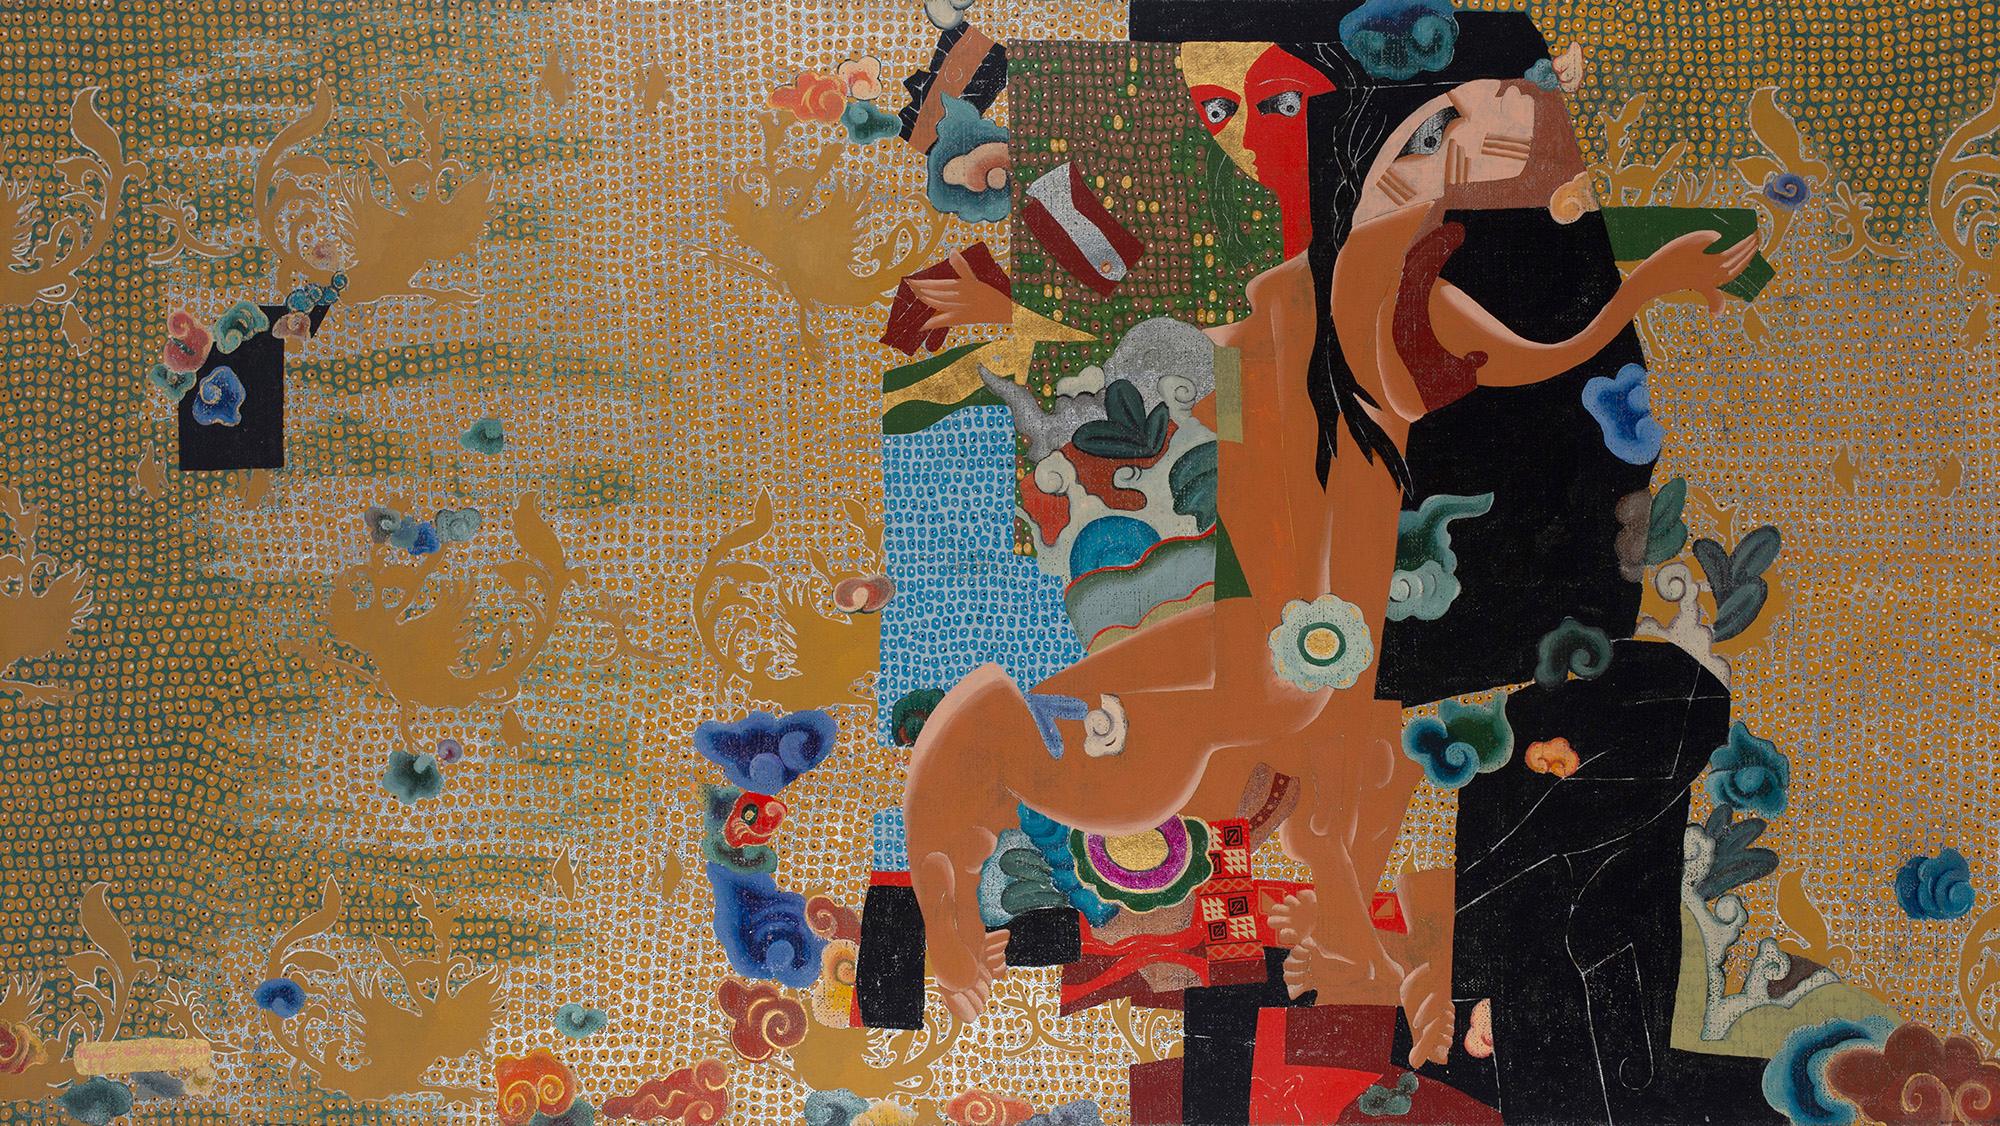 Nguyen The Hung Figurative Painting - 'Land of the Sleepwalker 05', Cubist Painting with Golds, Pinks, Blacks & Blues